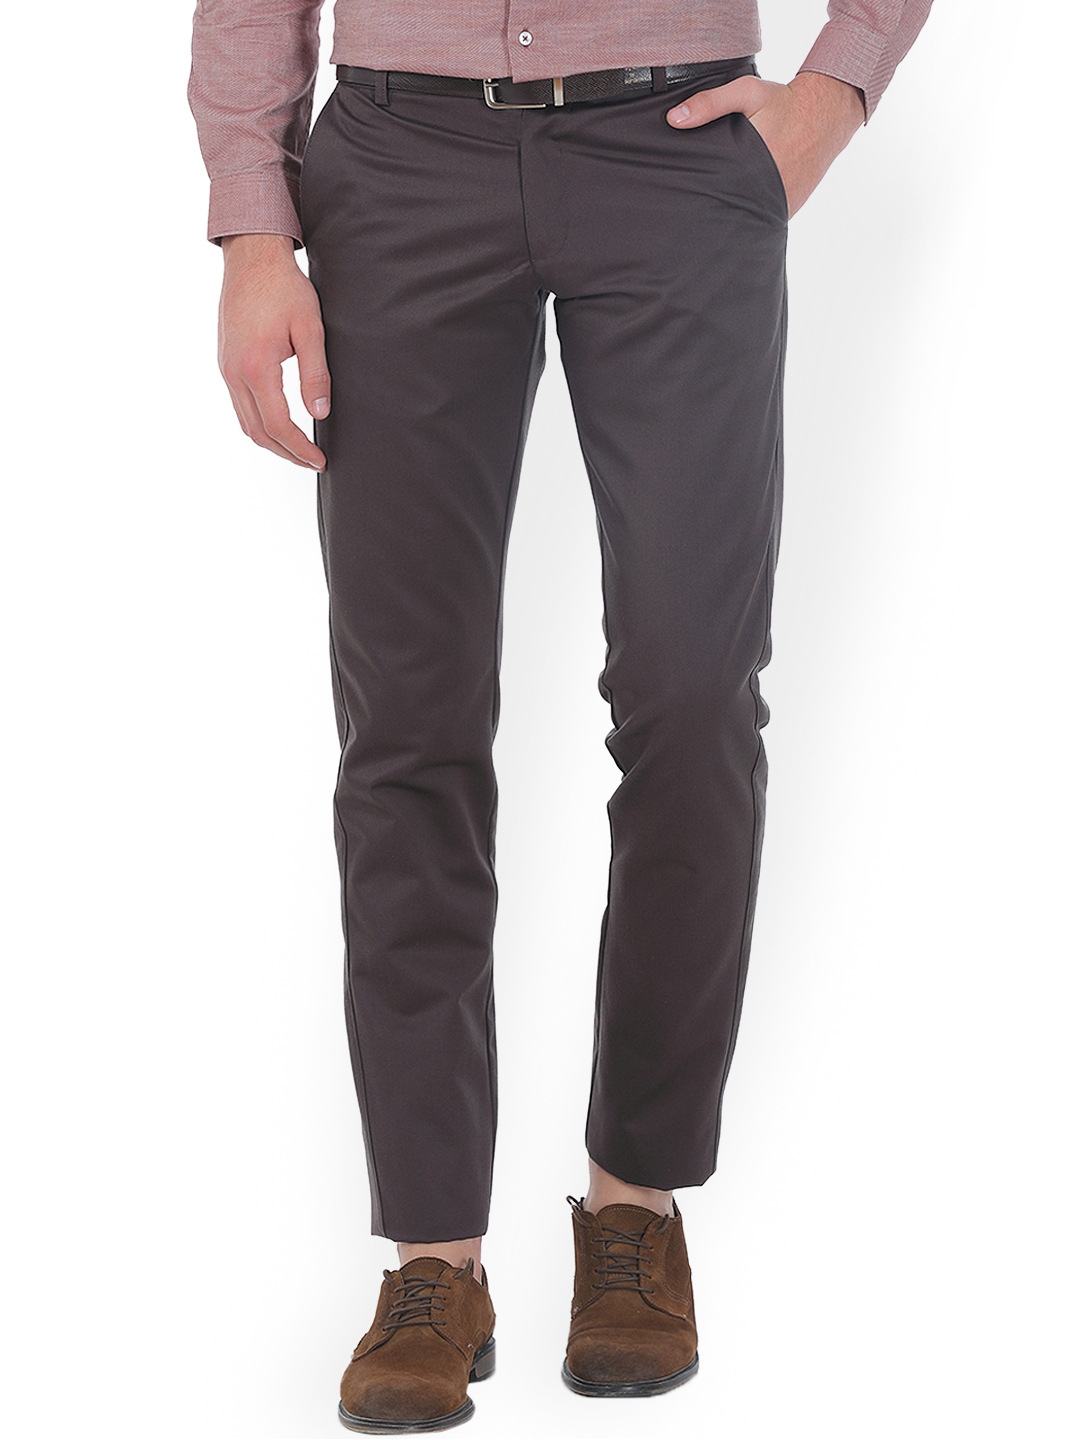 Buy Basics Brown Comfort Fit Trousers - Trousers for Men 1045743 | Myntra